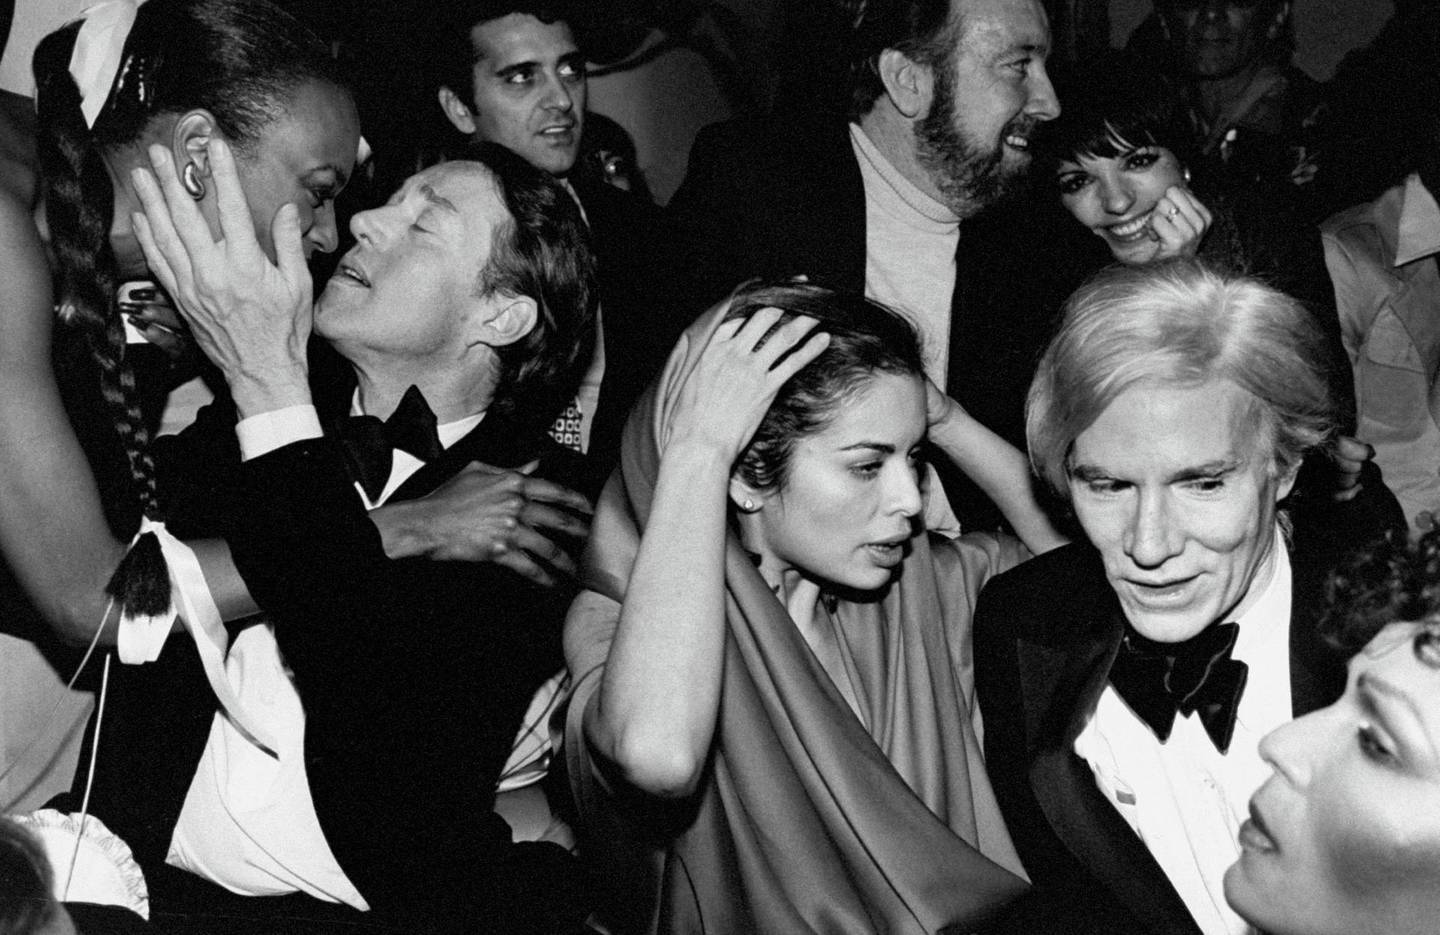 Celebrities during New Year's Eve party at Studio 54: (L-R) Halston, Bianca Jagger, Jack Haley, Jr. and wife Liza Minnelli and Andy Warhol.  (Photo by Robin Platzer/Twin Images/The LIFE Images Collection/Getty Images)